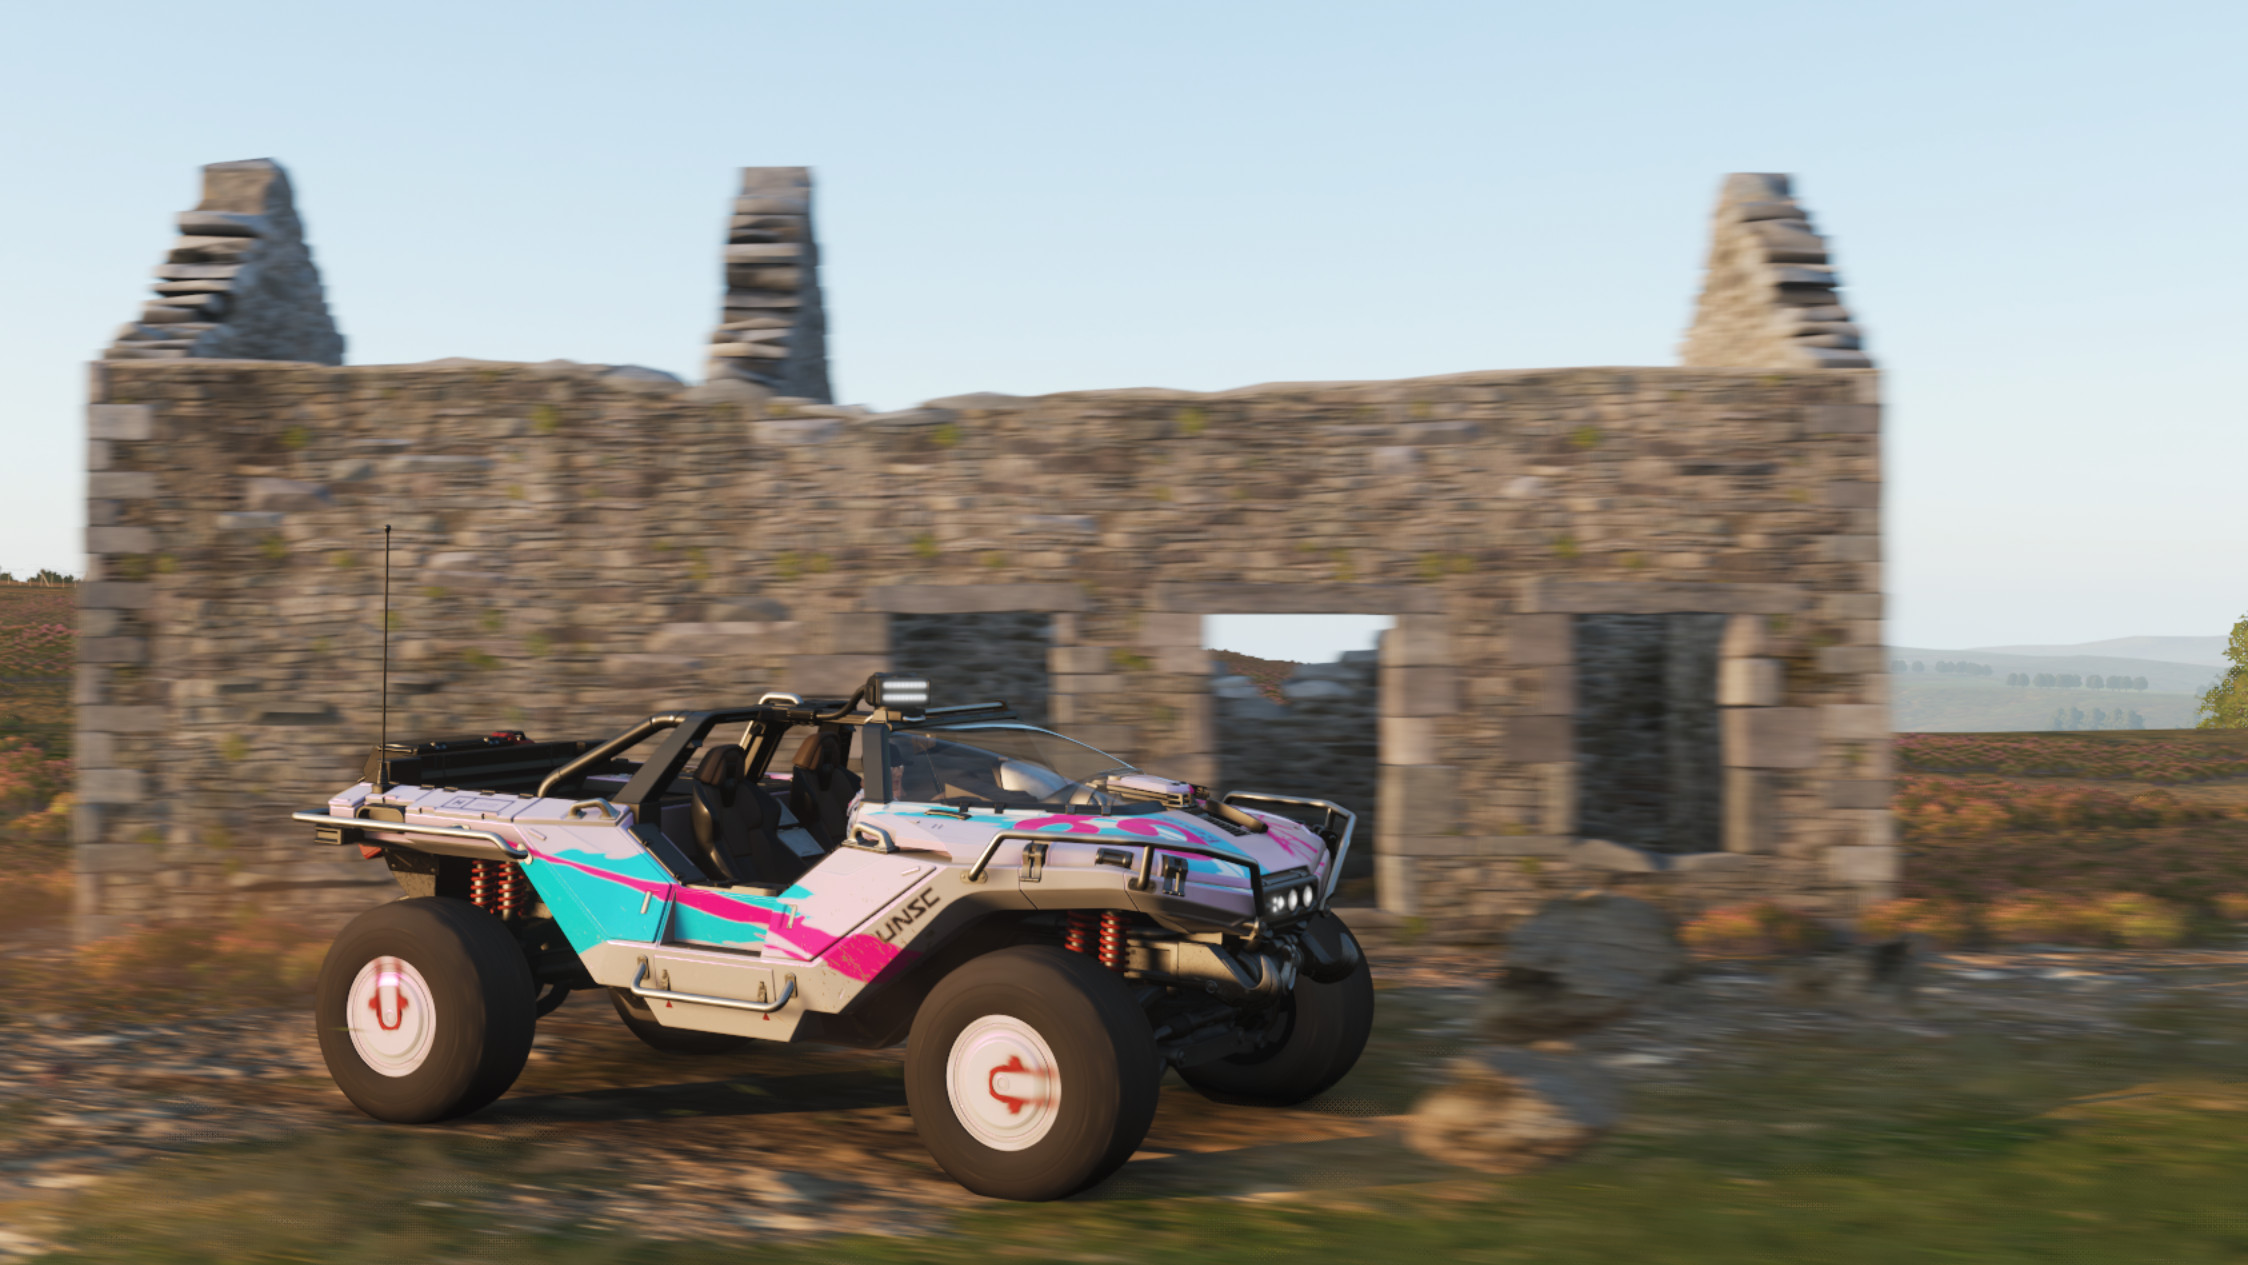 Forza Horizon 4 update adds eclectic mix of new cars – even a